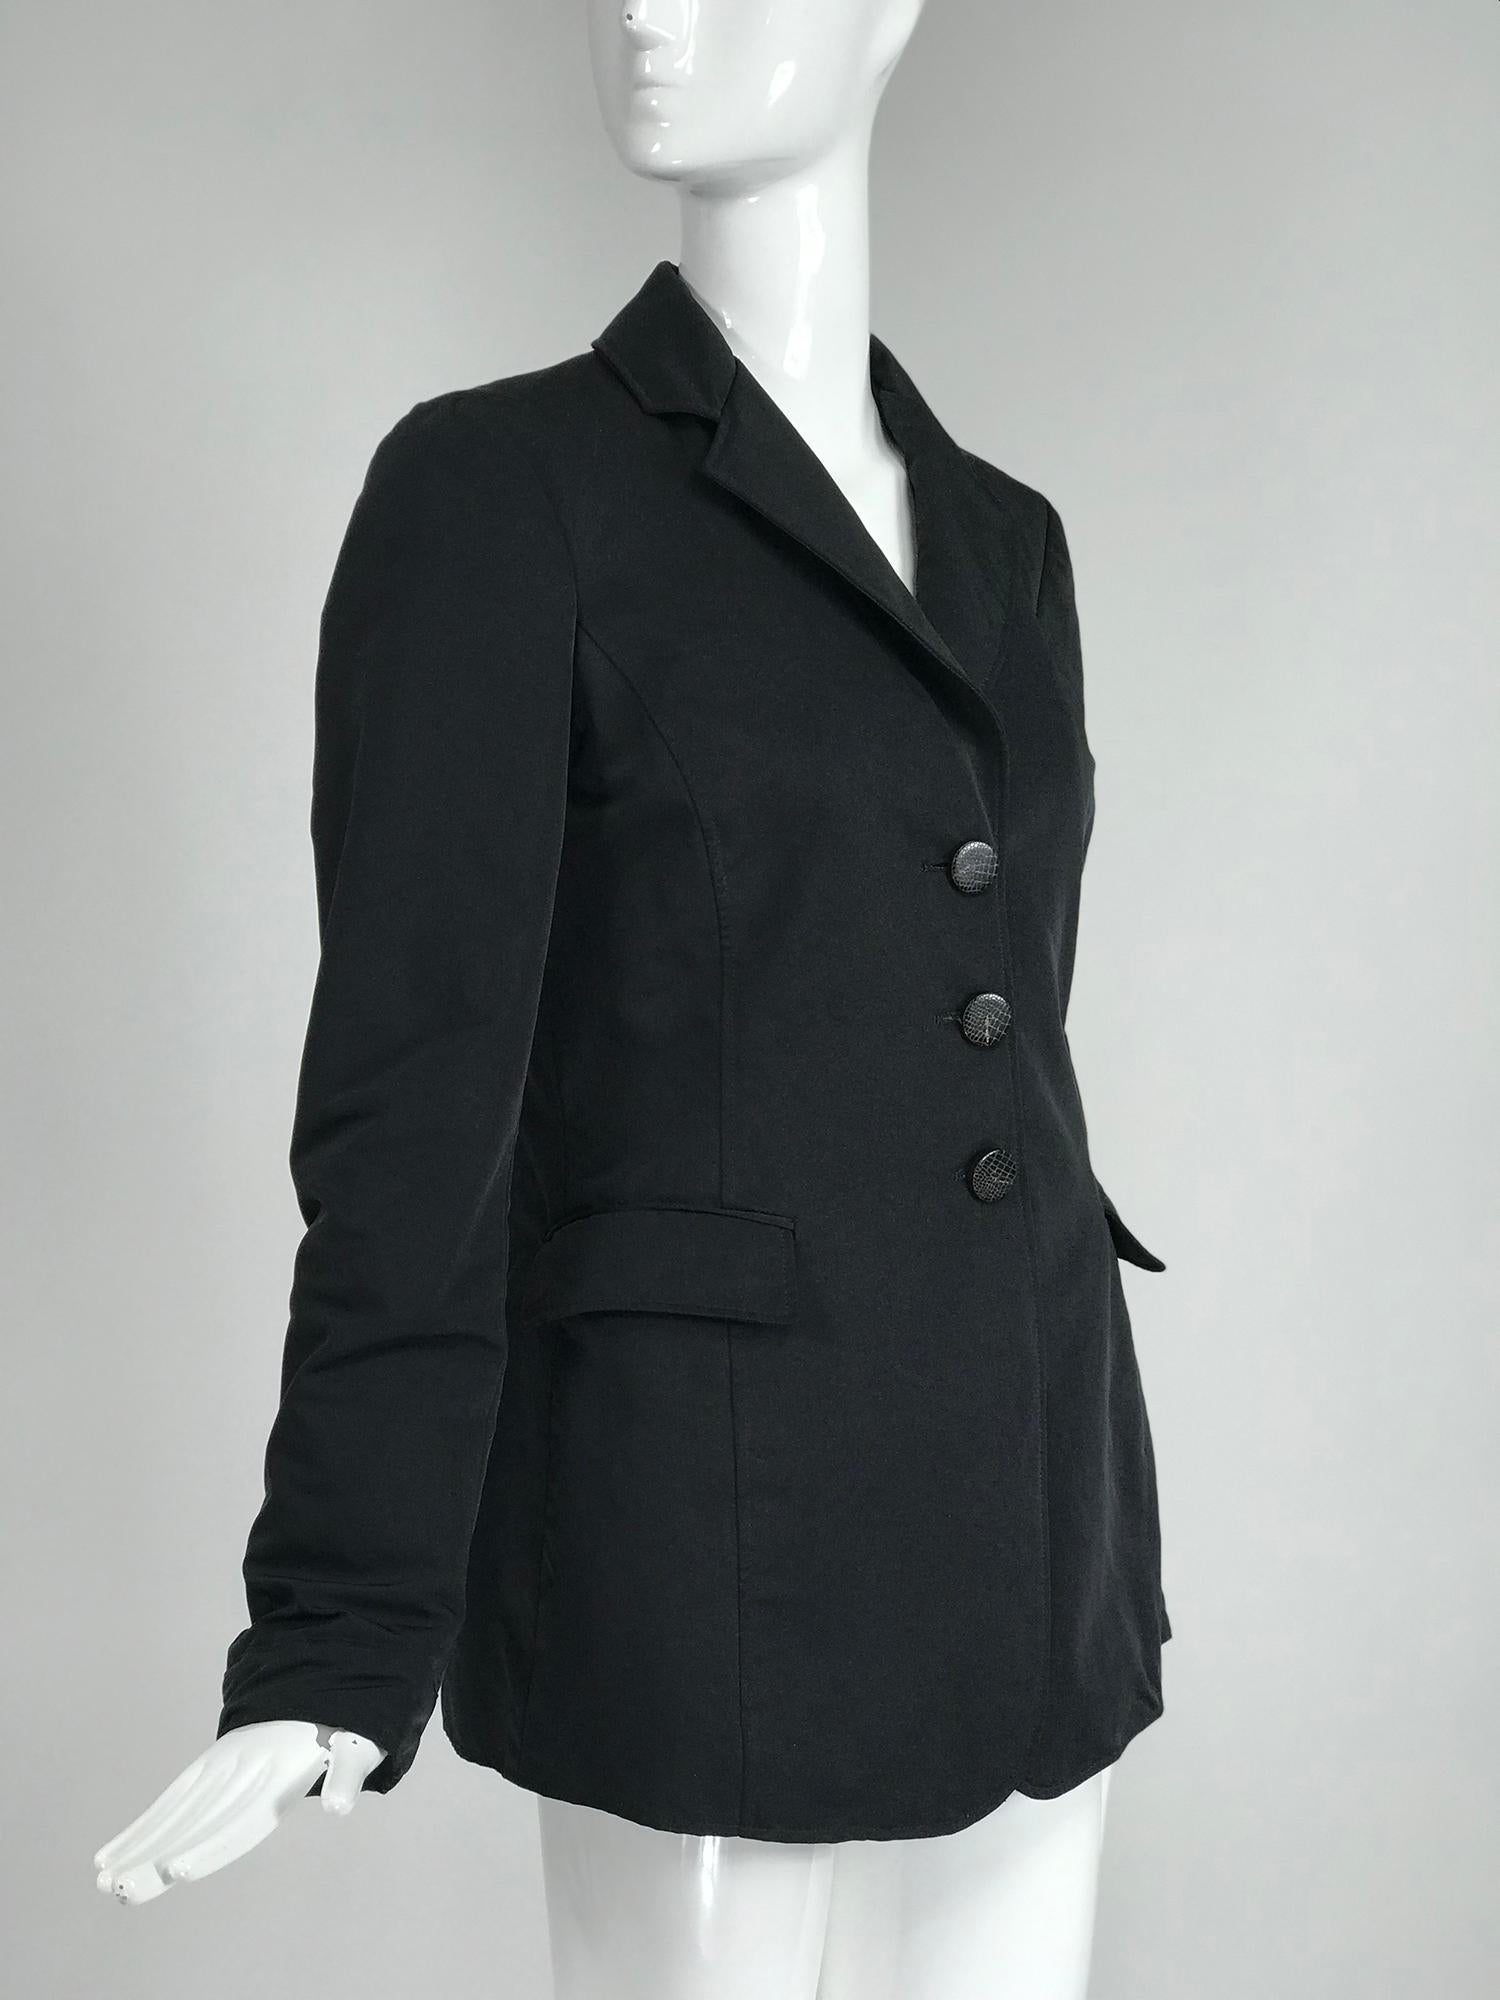 Giorgio Armani Collezioni black nylon single breasted riding style jacket. Single breasted jacket with princess seams, button front, notched lapels, insulated for warmth, 
decorative flap pockets. The jacket has a yoke shoulder back and hem center